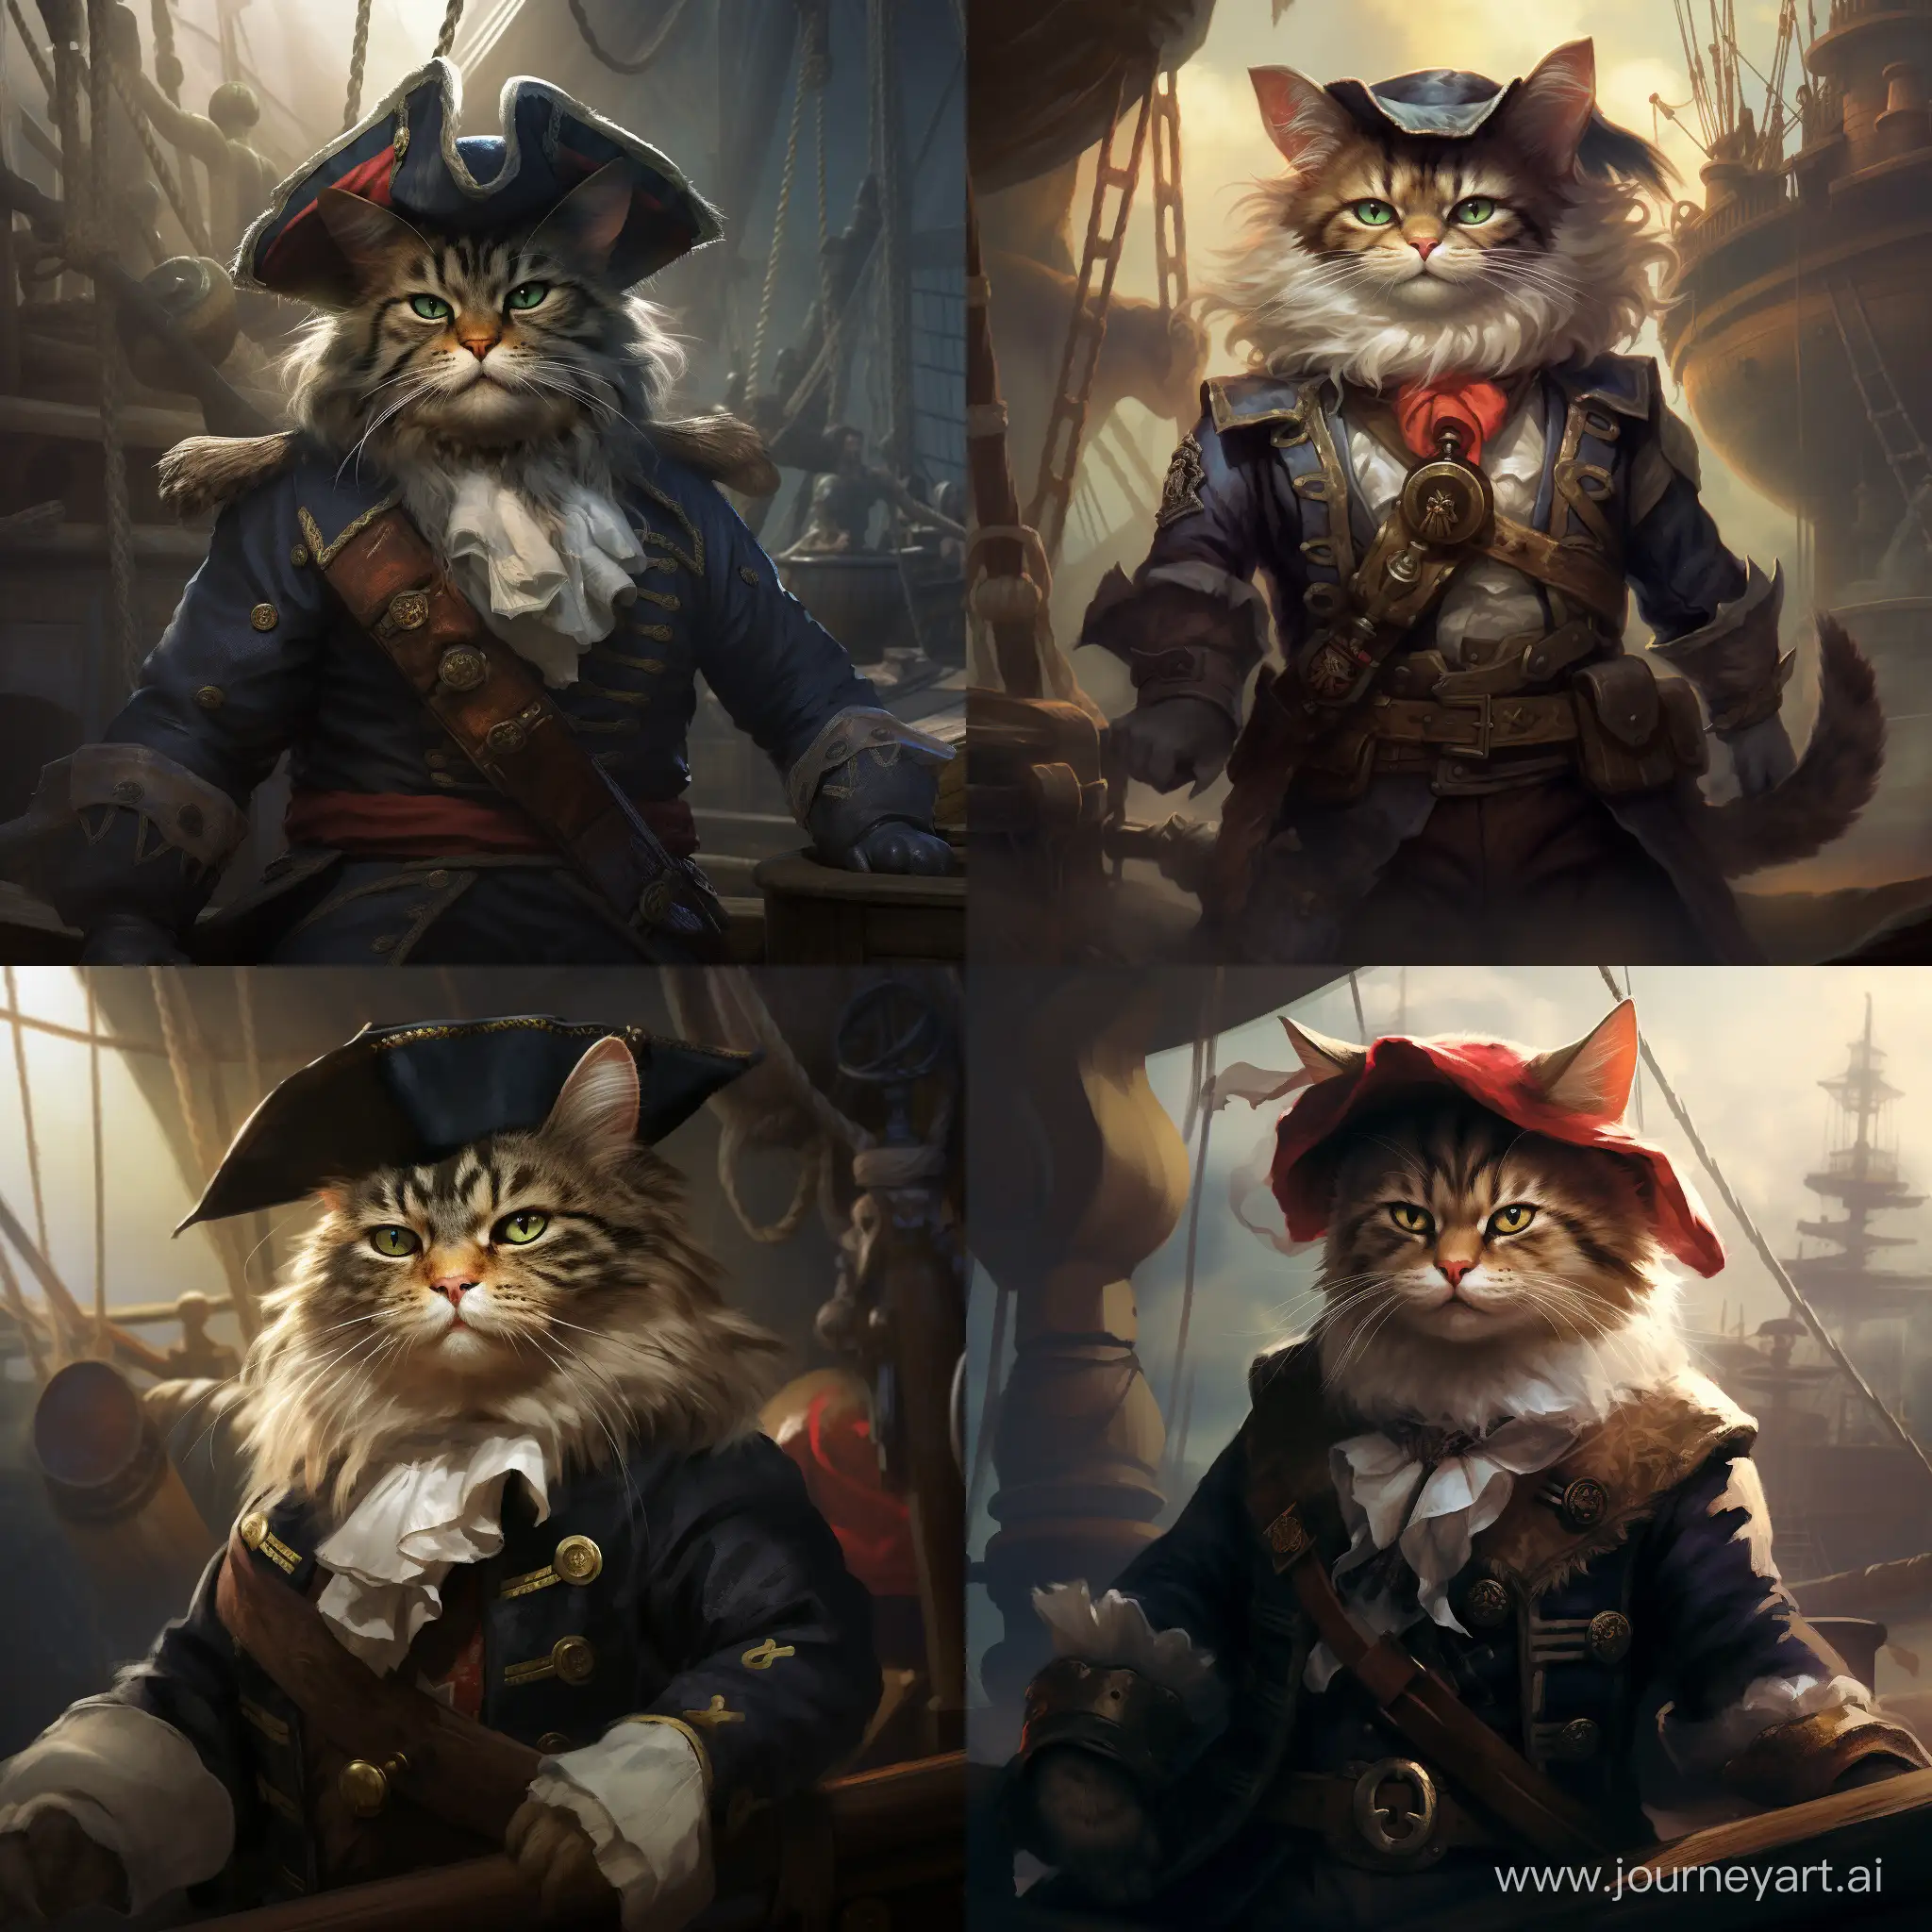 Stern-Pirate-Cat-Art-with-Aspect-Ratio-11